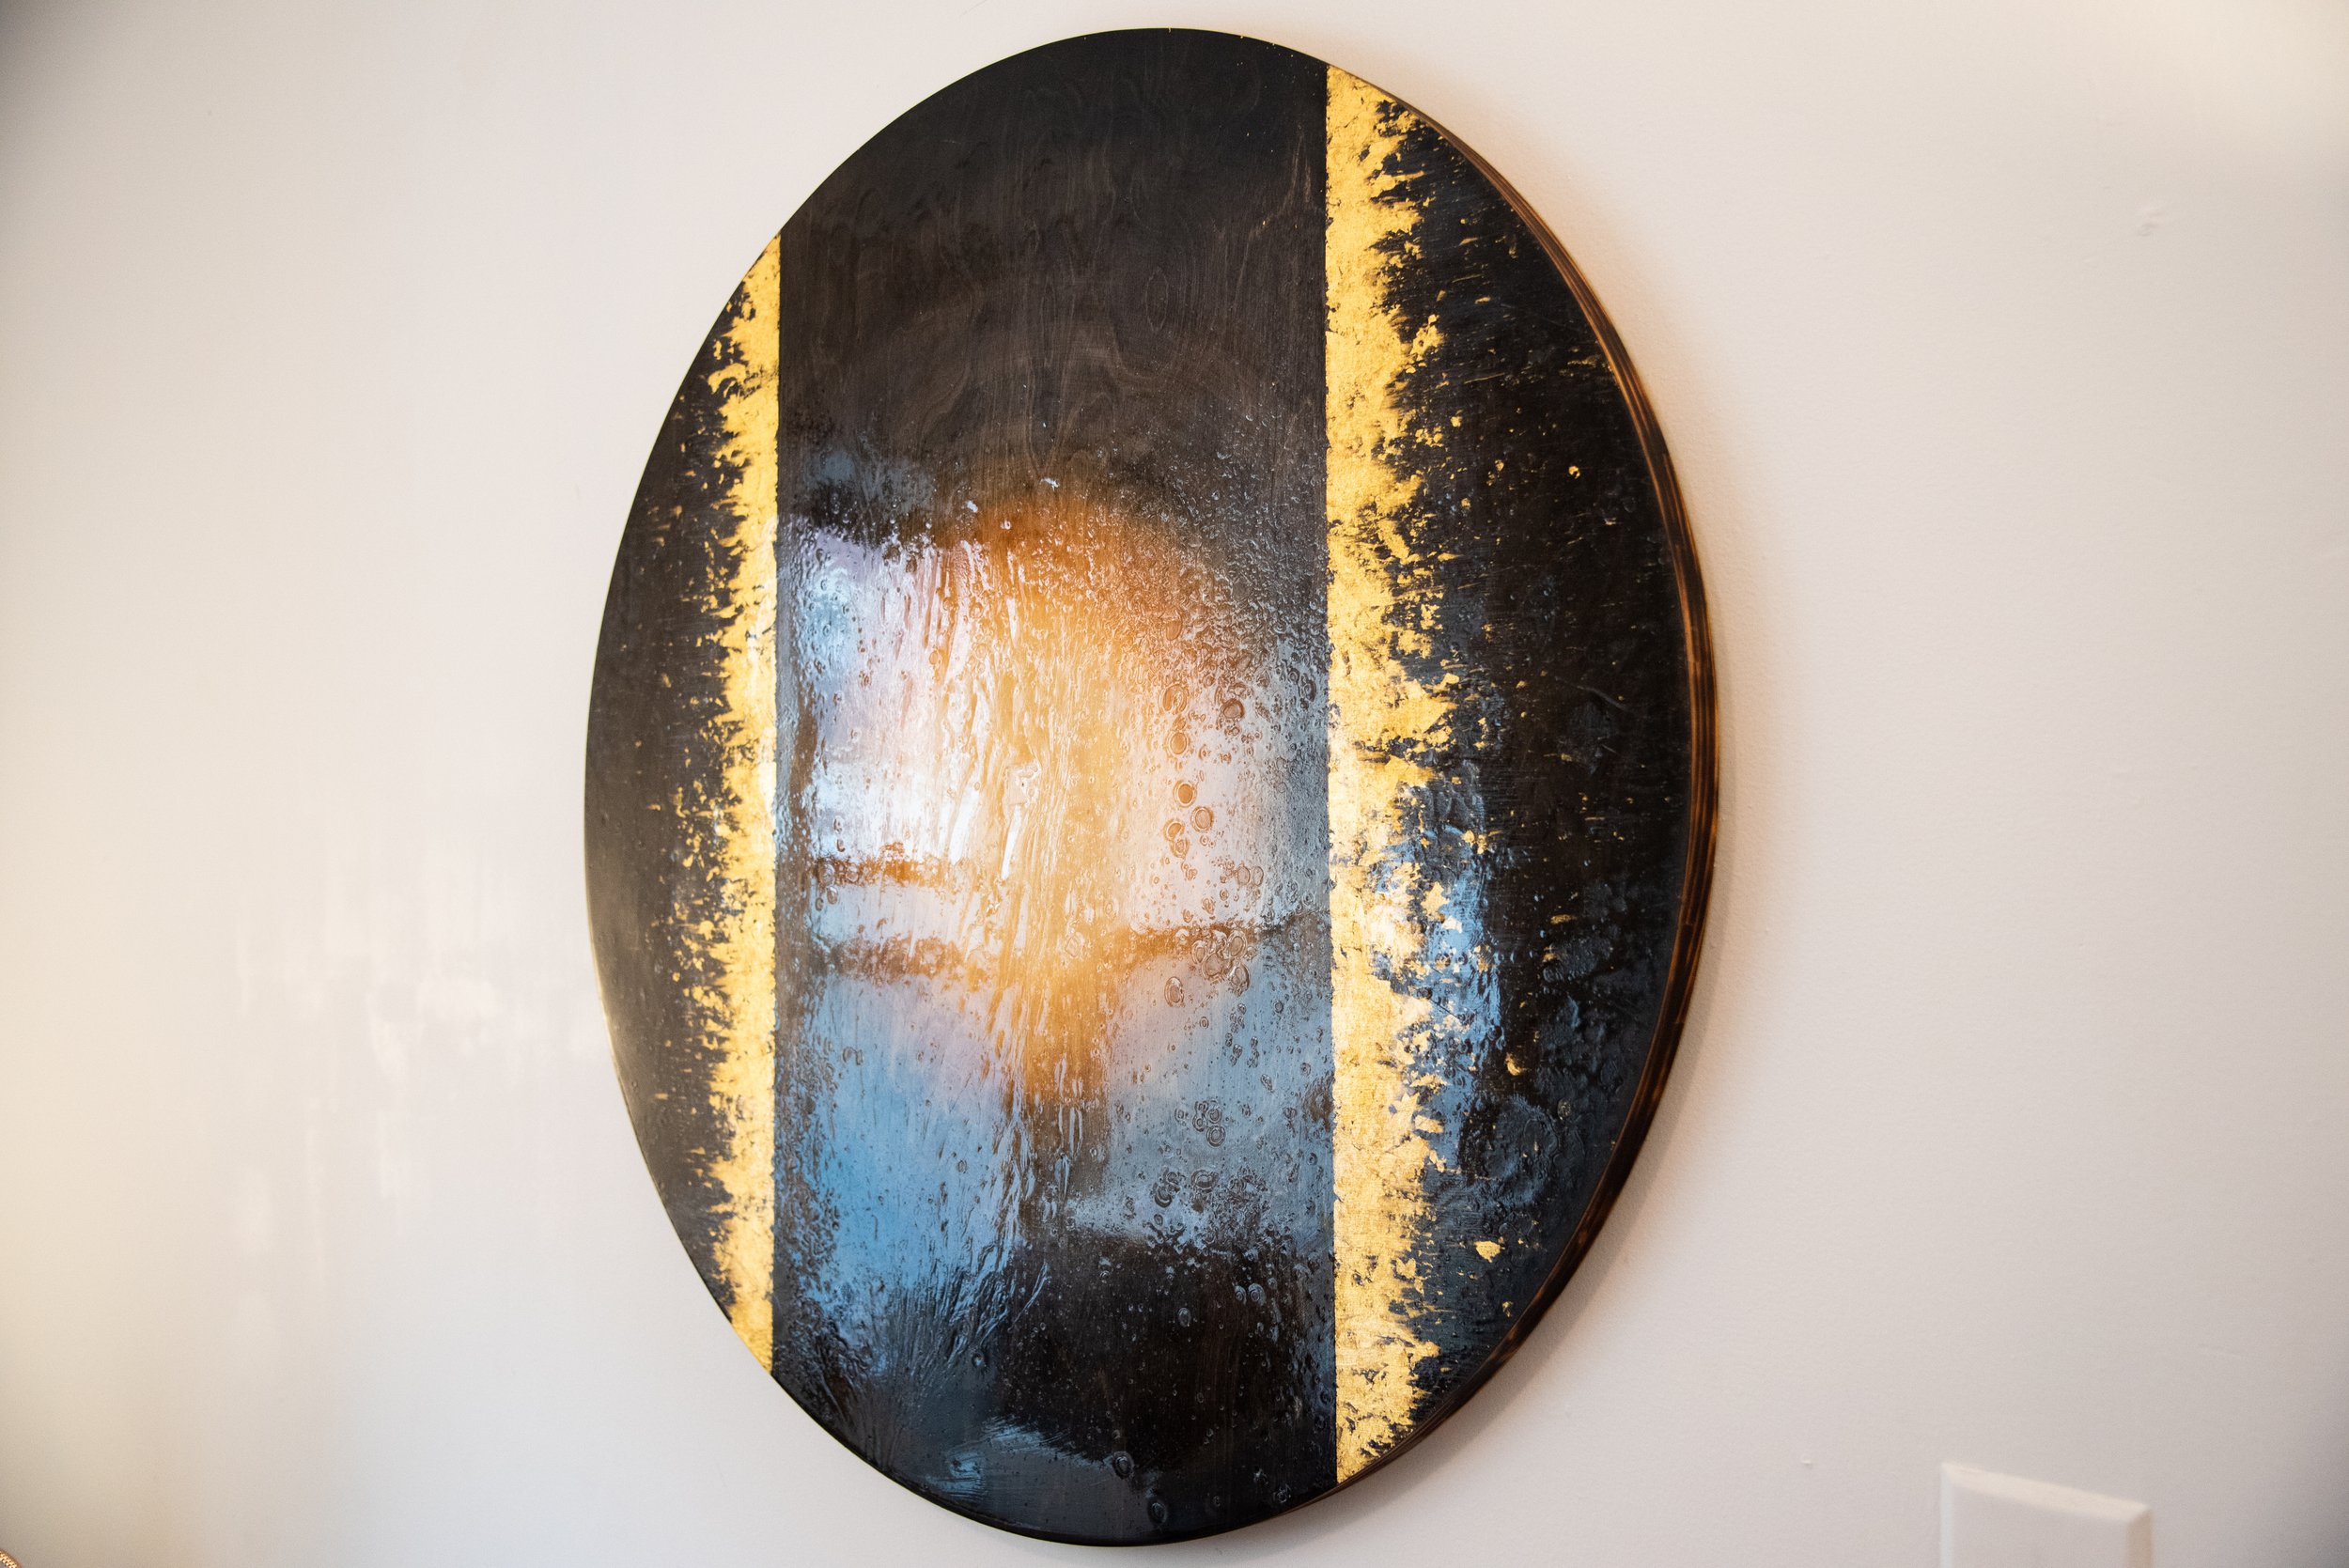  blood density [rich soil] 2021 oil paint, flame, mica, 24k gold and resin on birch 36” round (sold) 